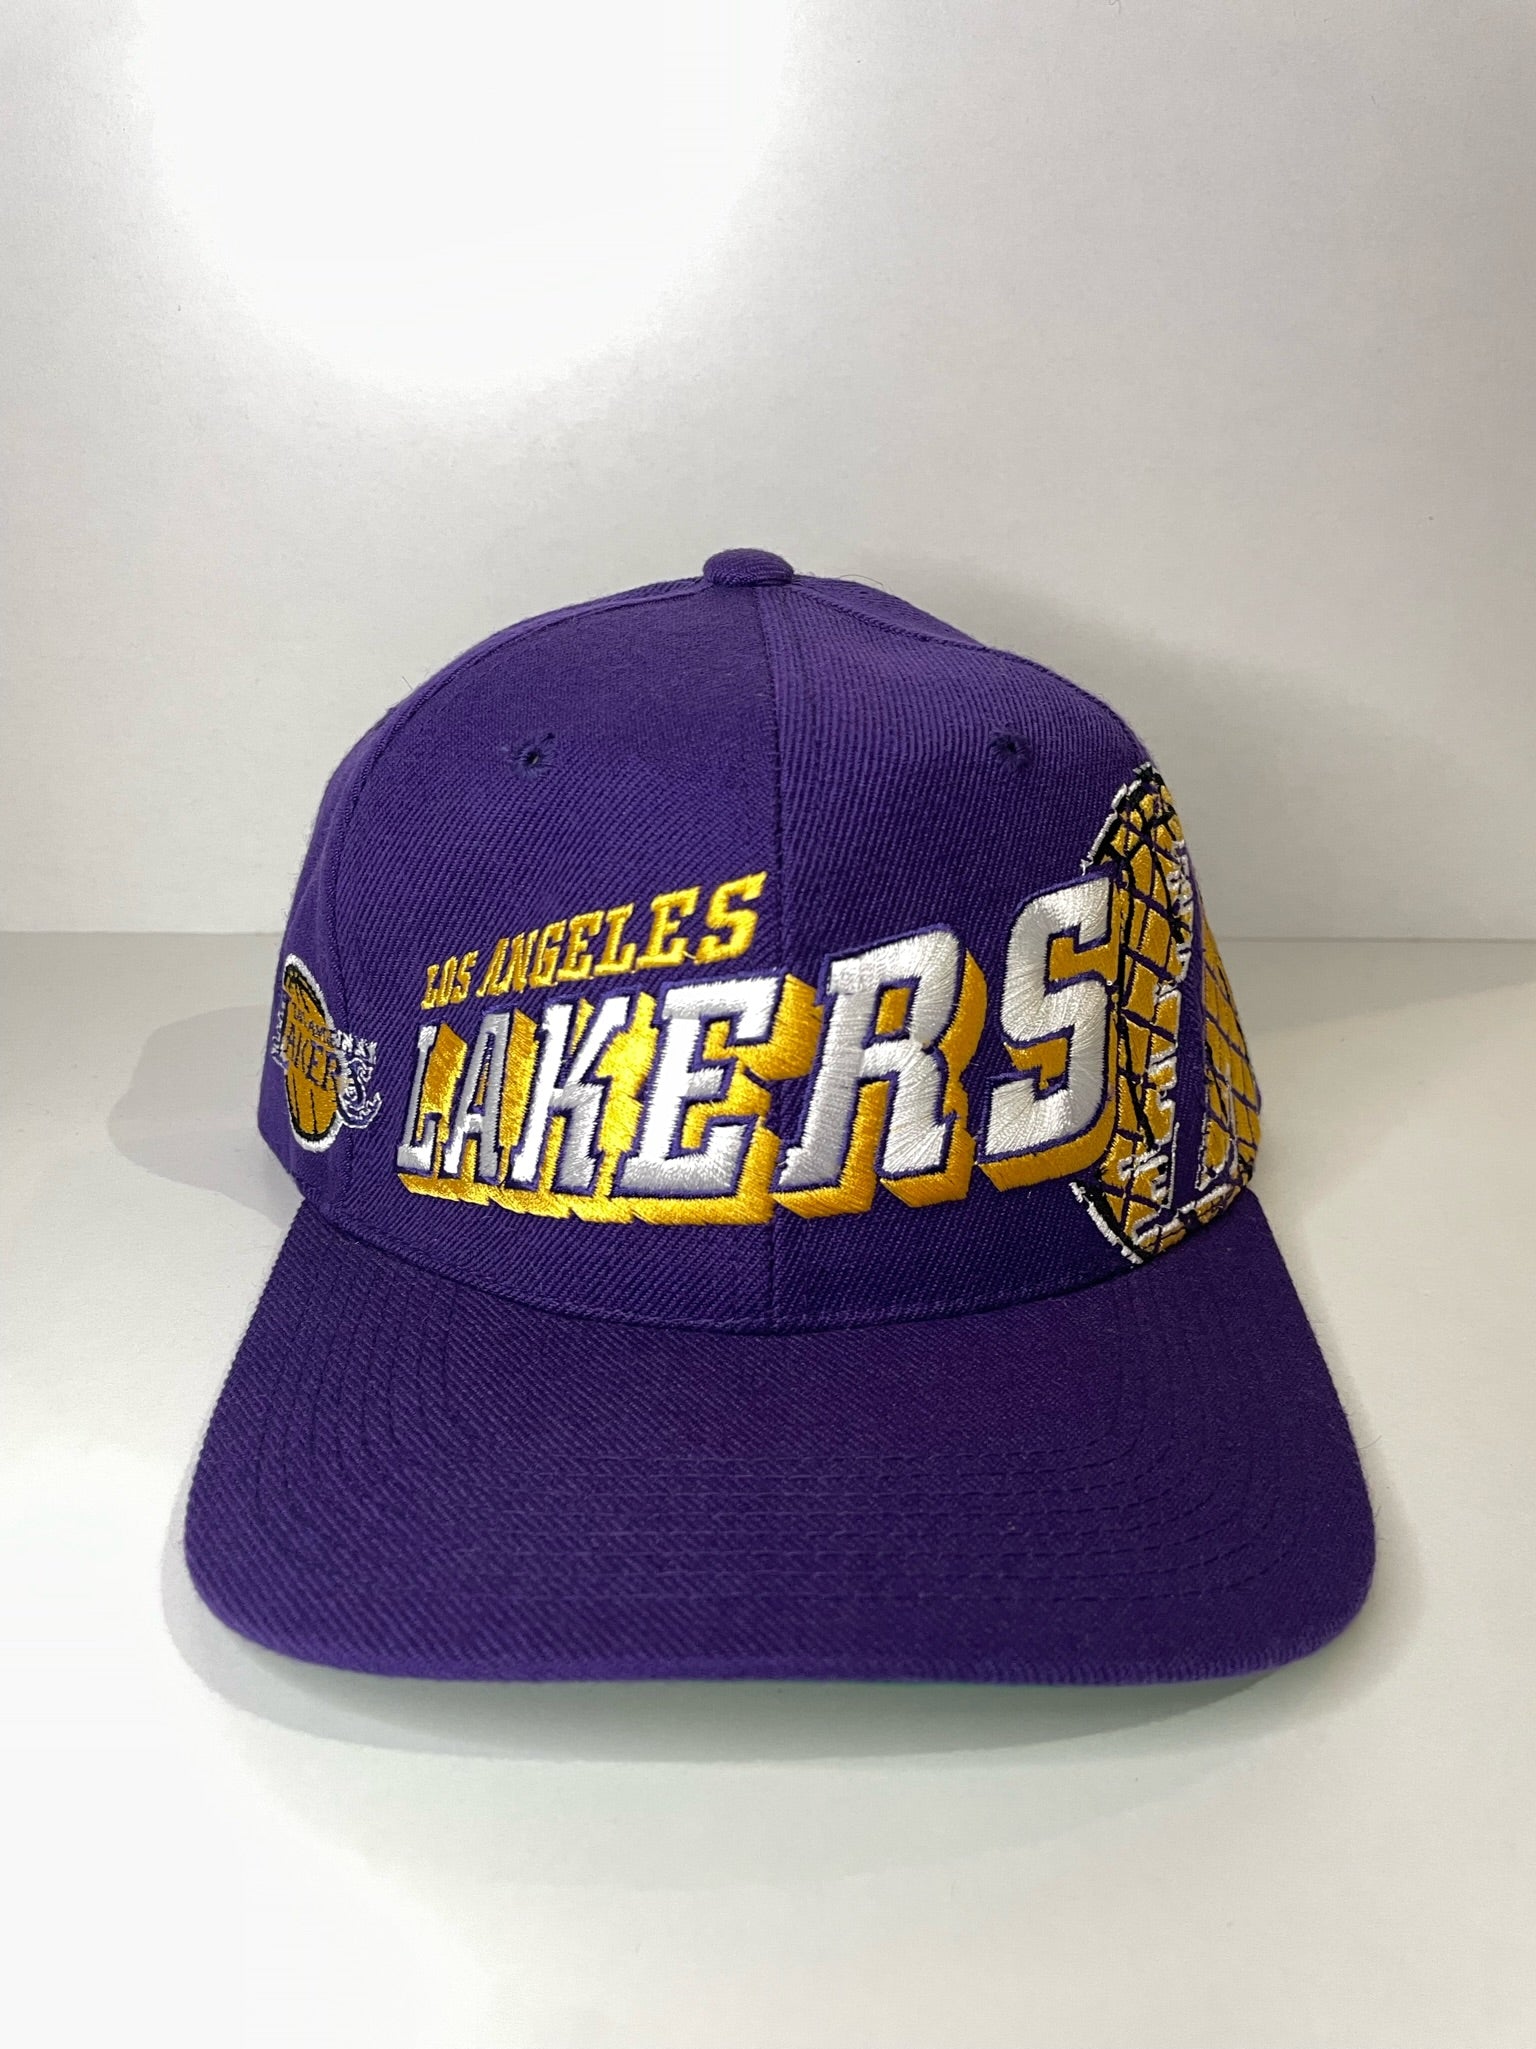 Vintage Los Angeles Lakers Hat 90s Snapback Cap The Game Limited Edition B2